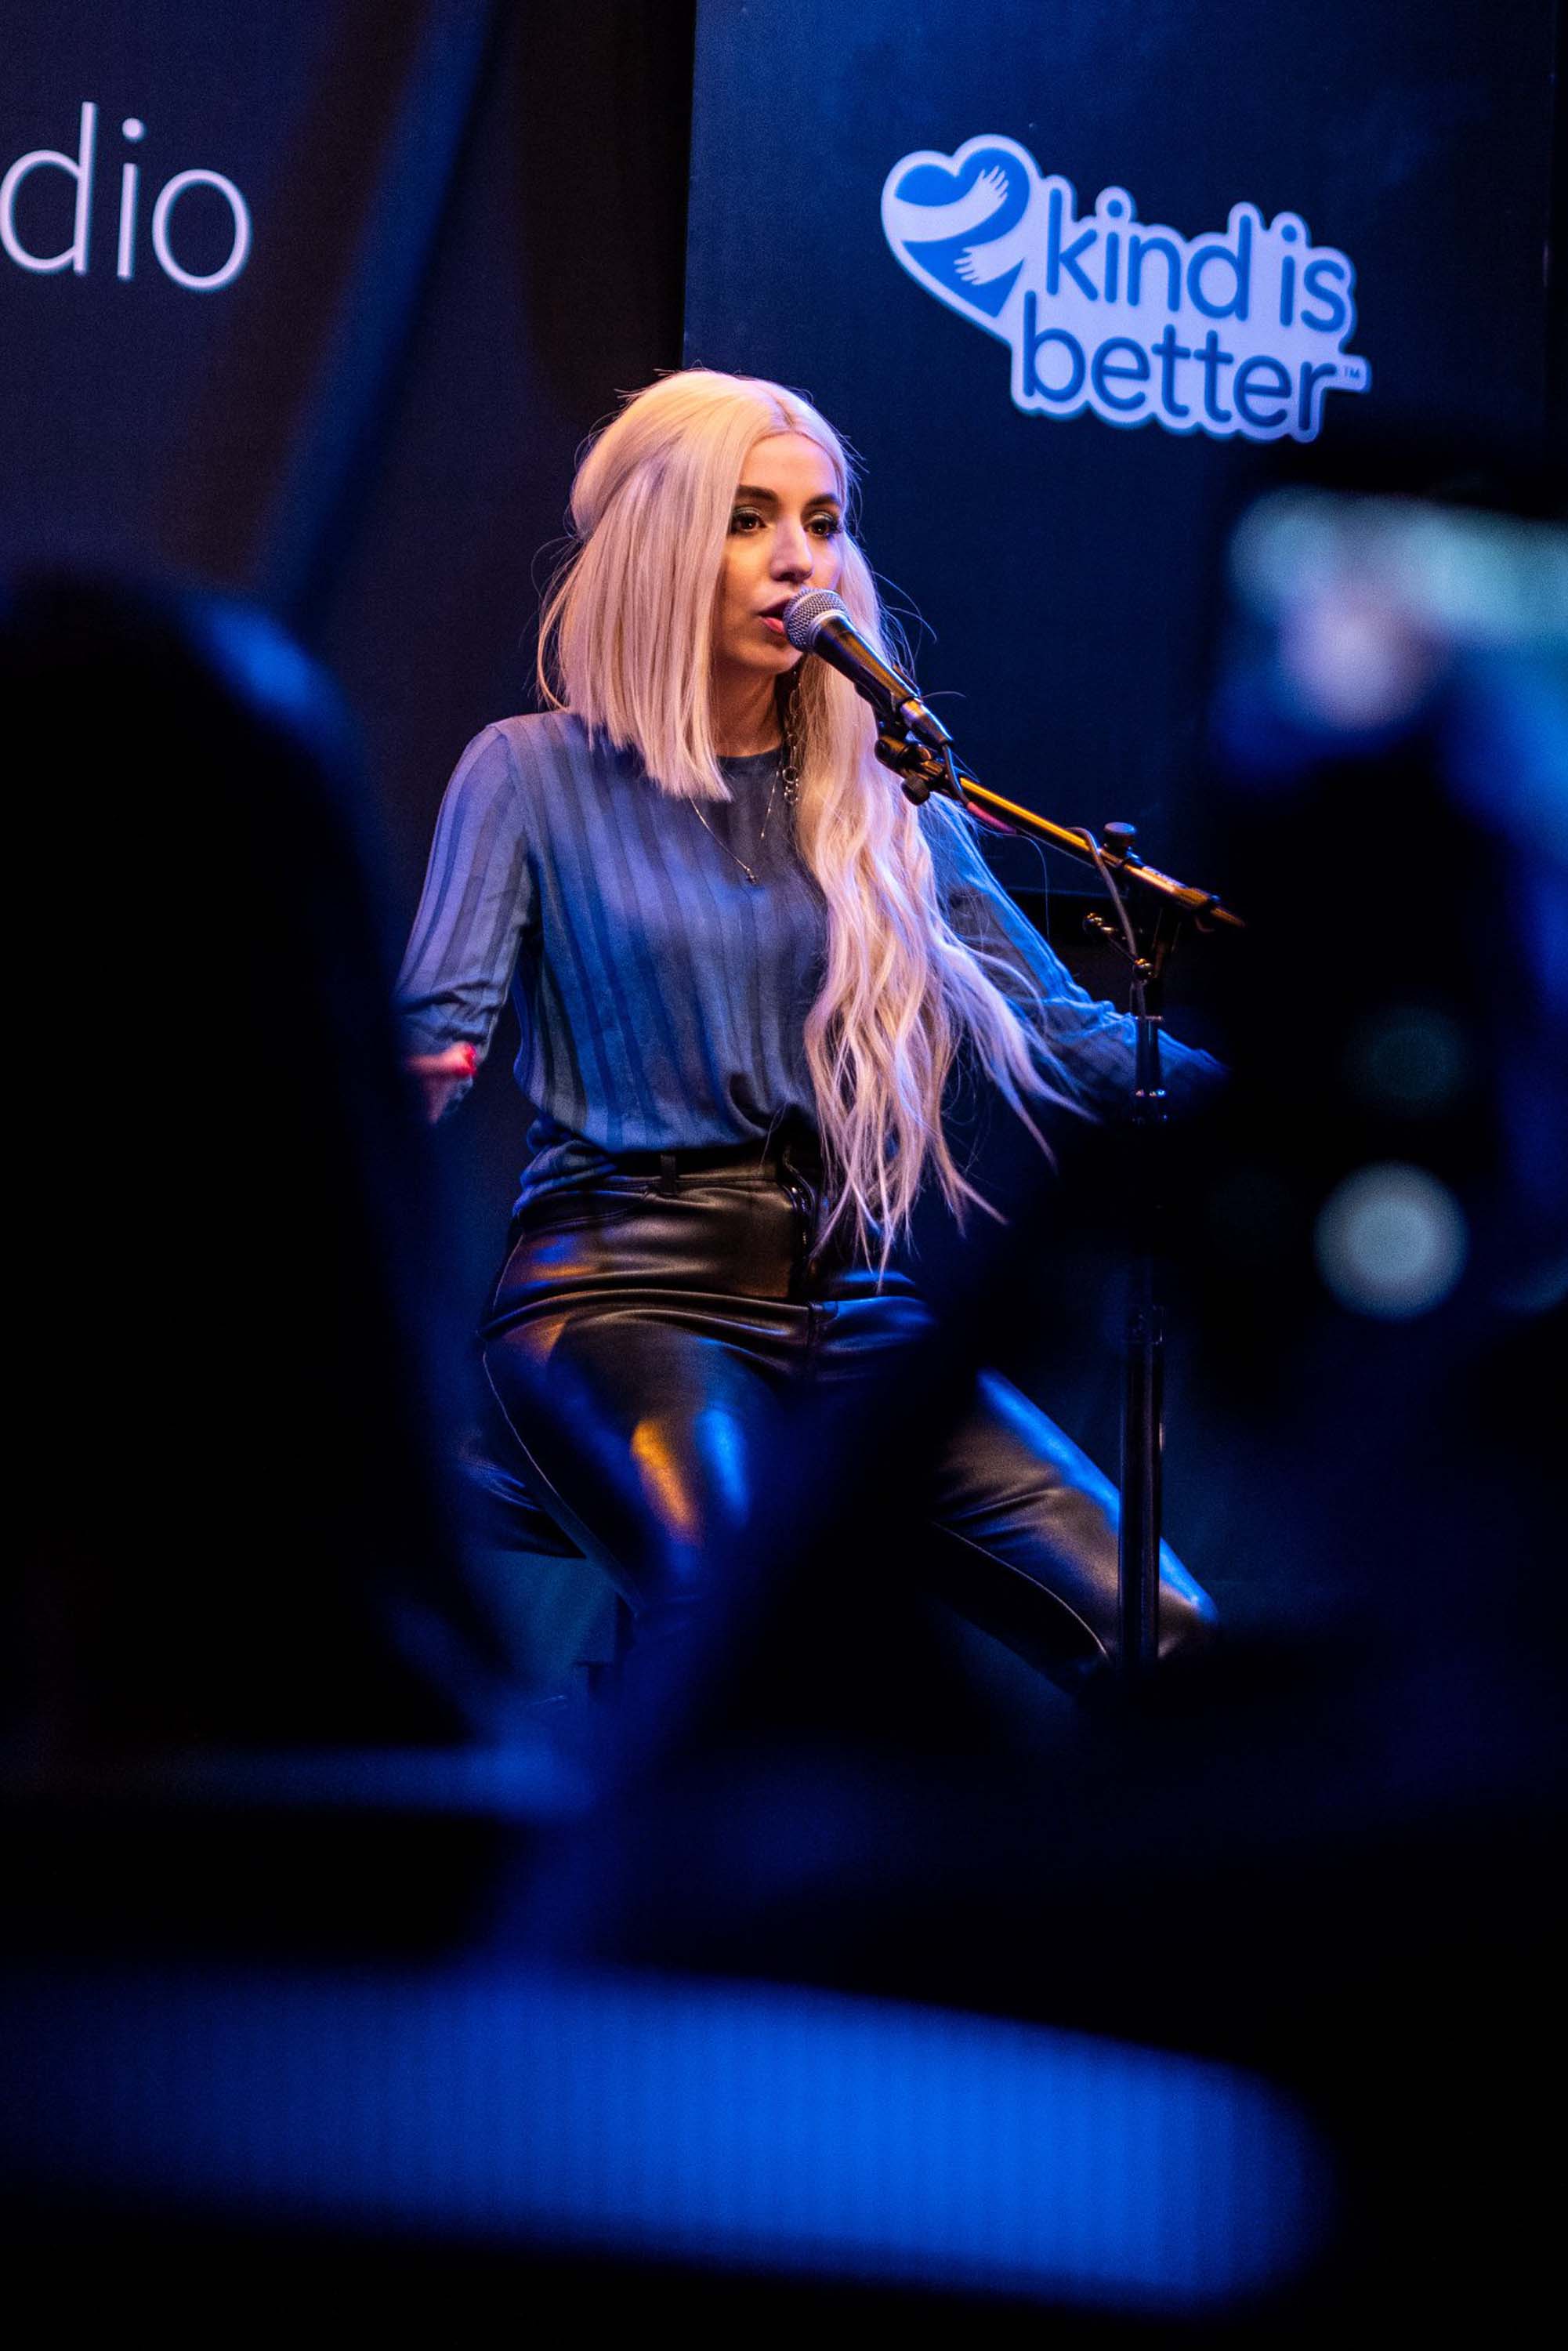 Ava Max performs at the Bloodworks Live Studios